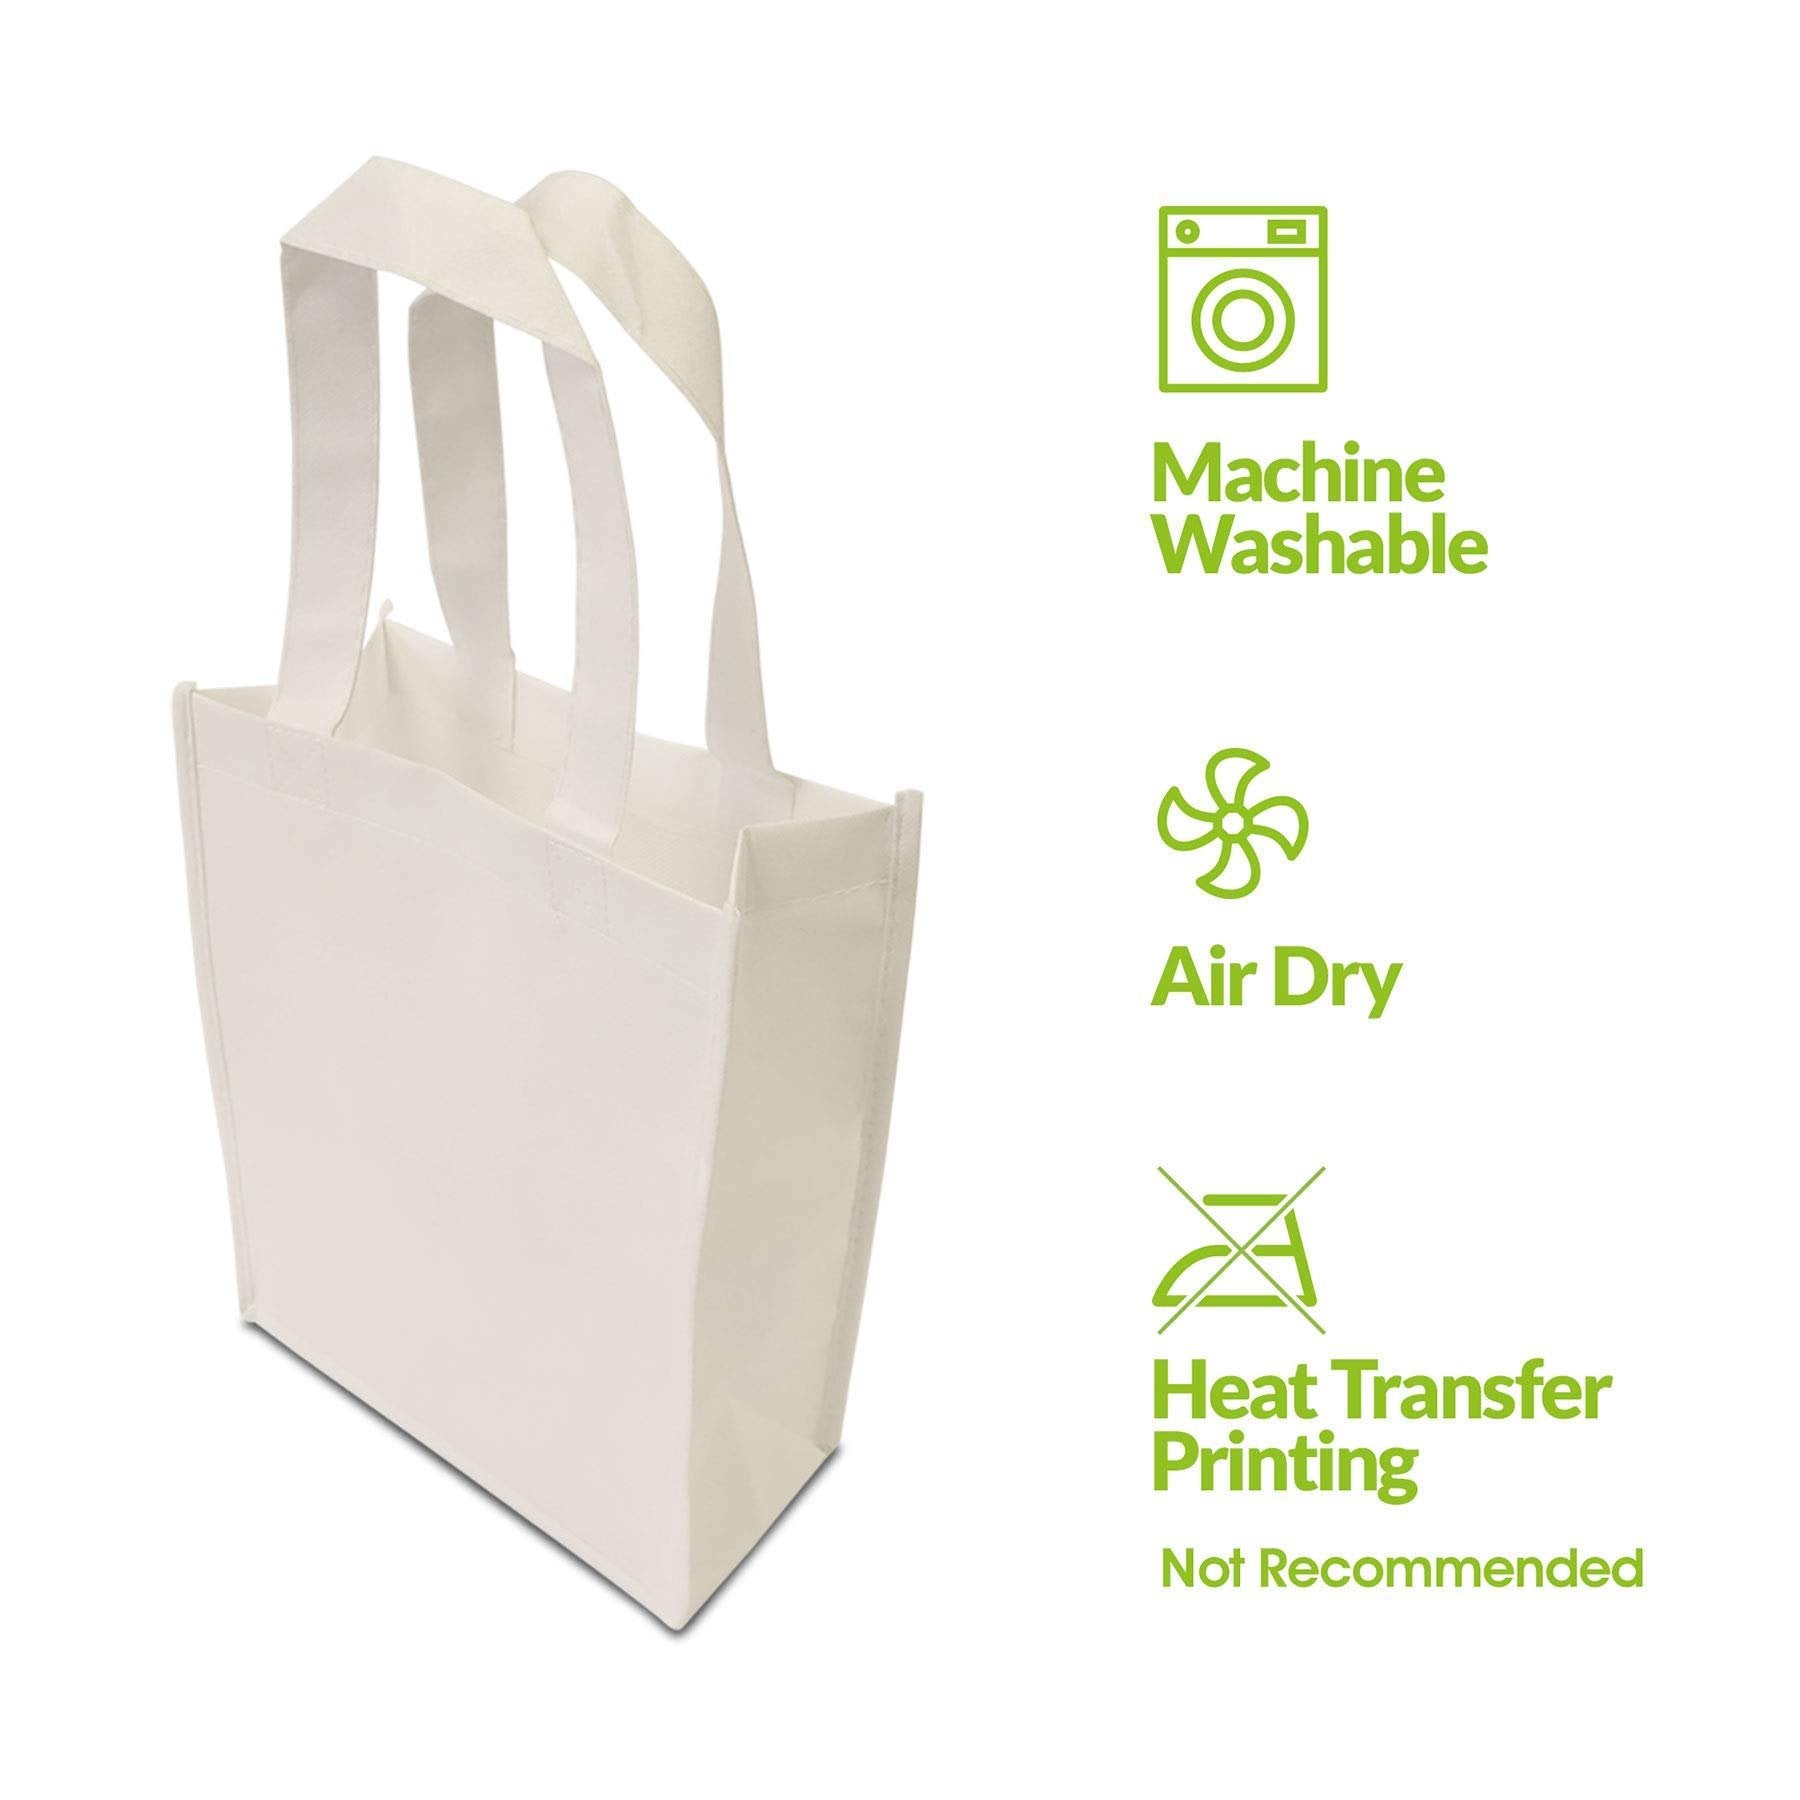 12 Reusable White Wedding Gift Shopping Bags w/ Handles - 8x4x10 Inch Size